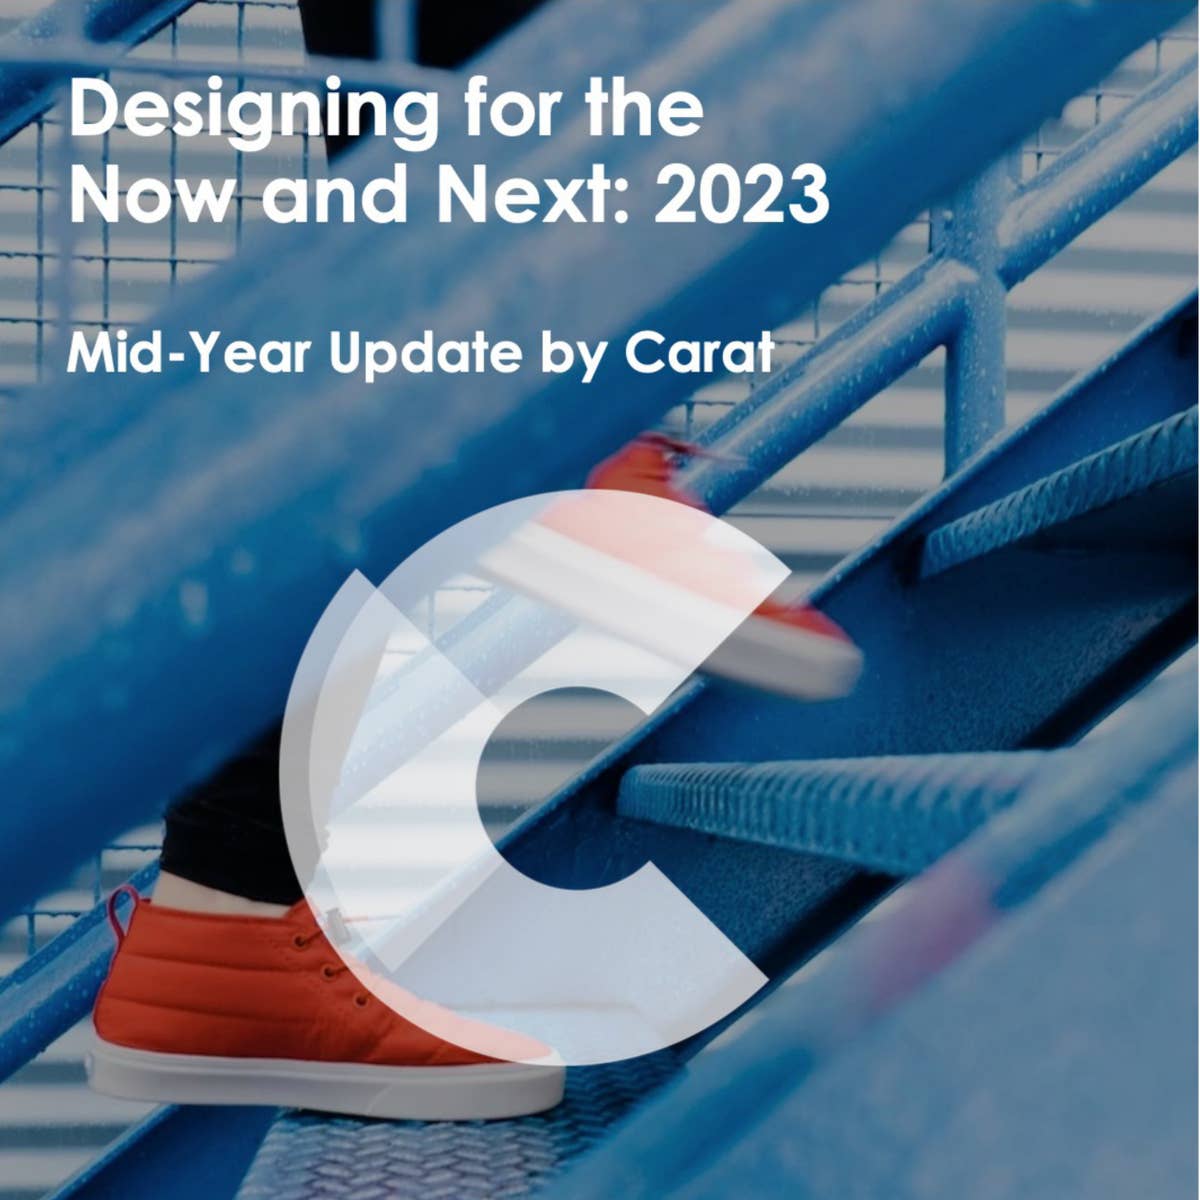 Designing for the Now and Next: 2023 Mid-Year Update